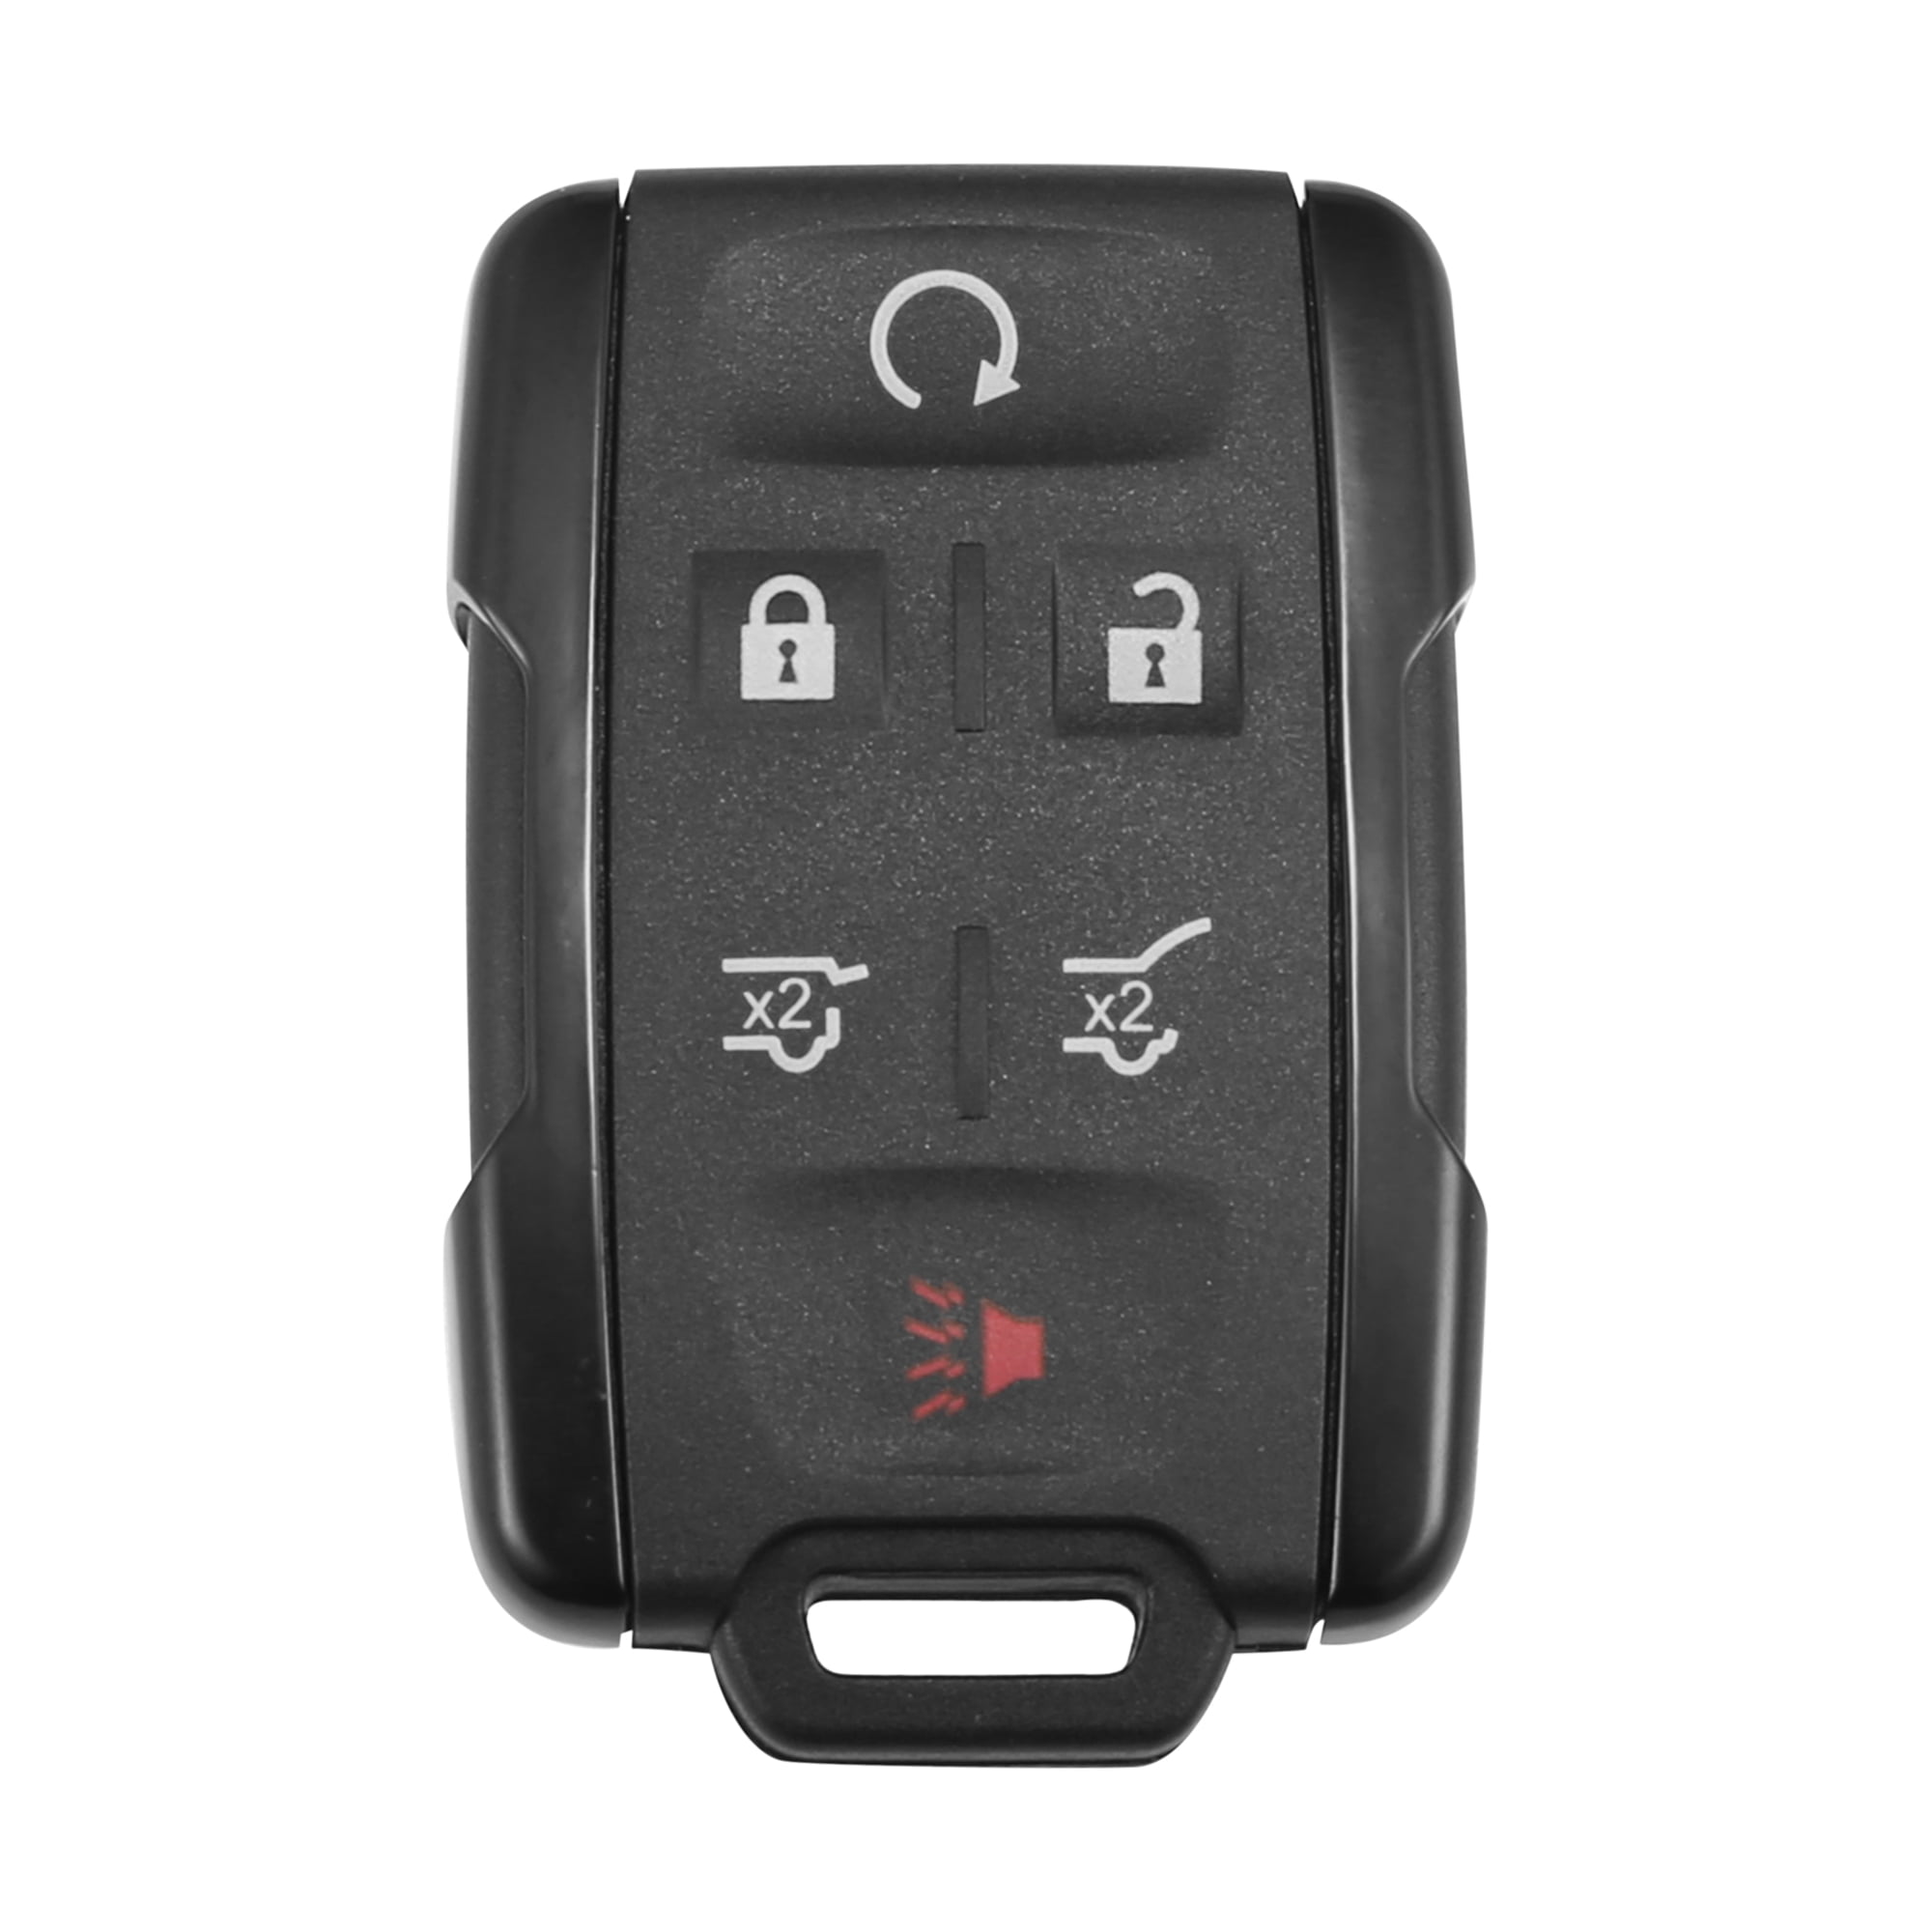 Replacement Remote Control Key 6B for Chevrolet GMC FCC# M3N-32337100-315MHz 